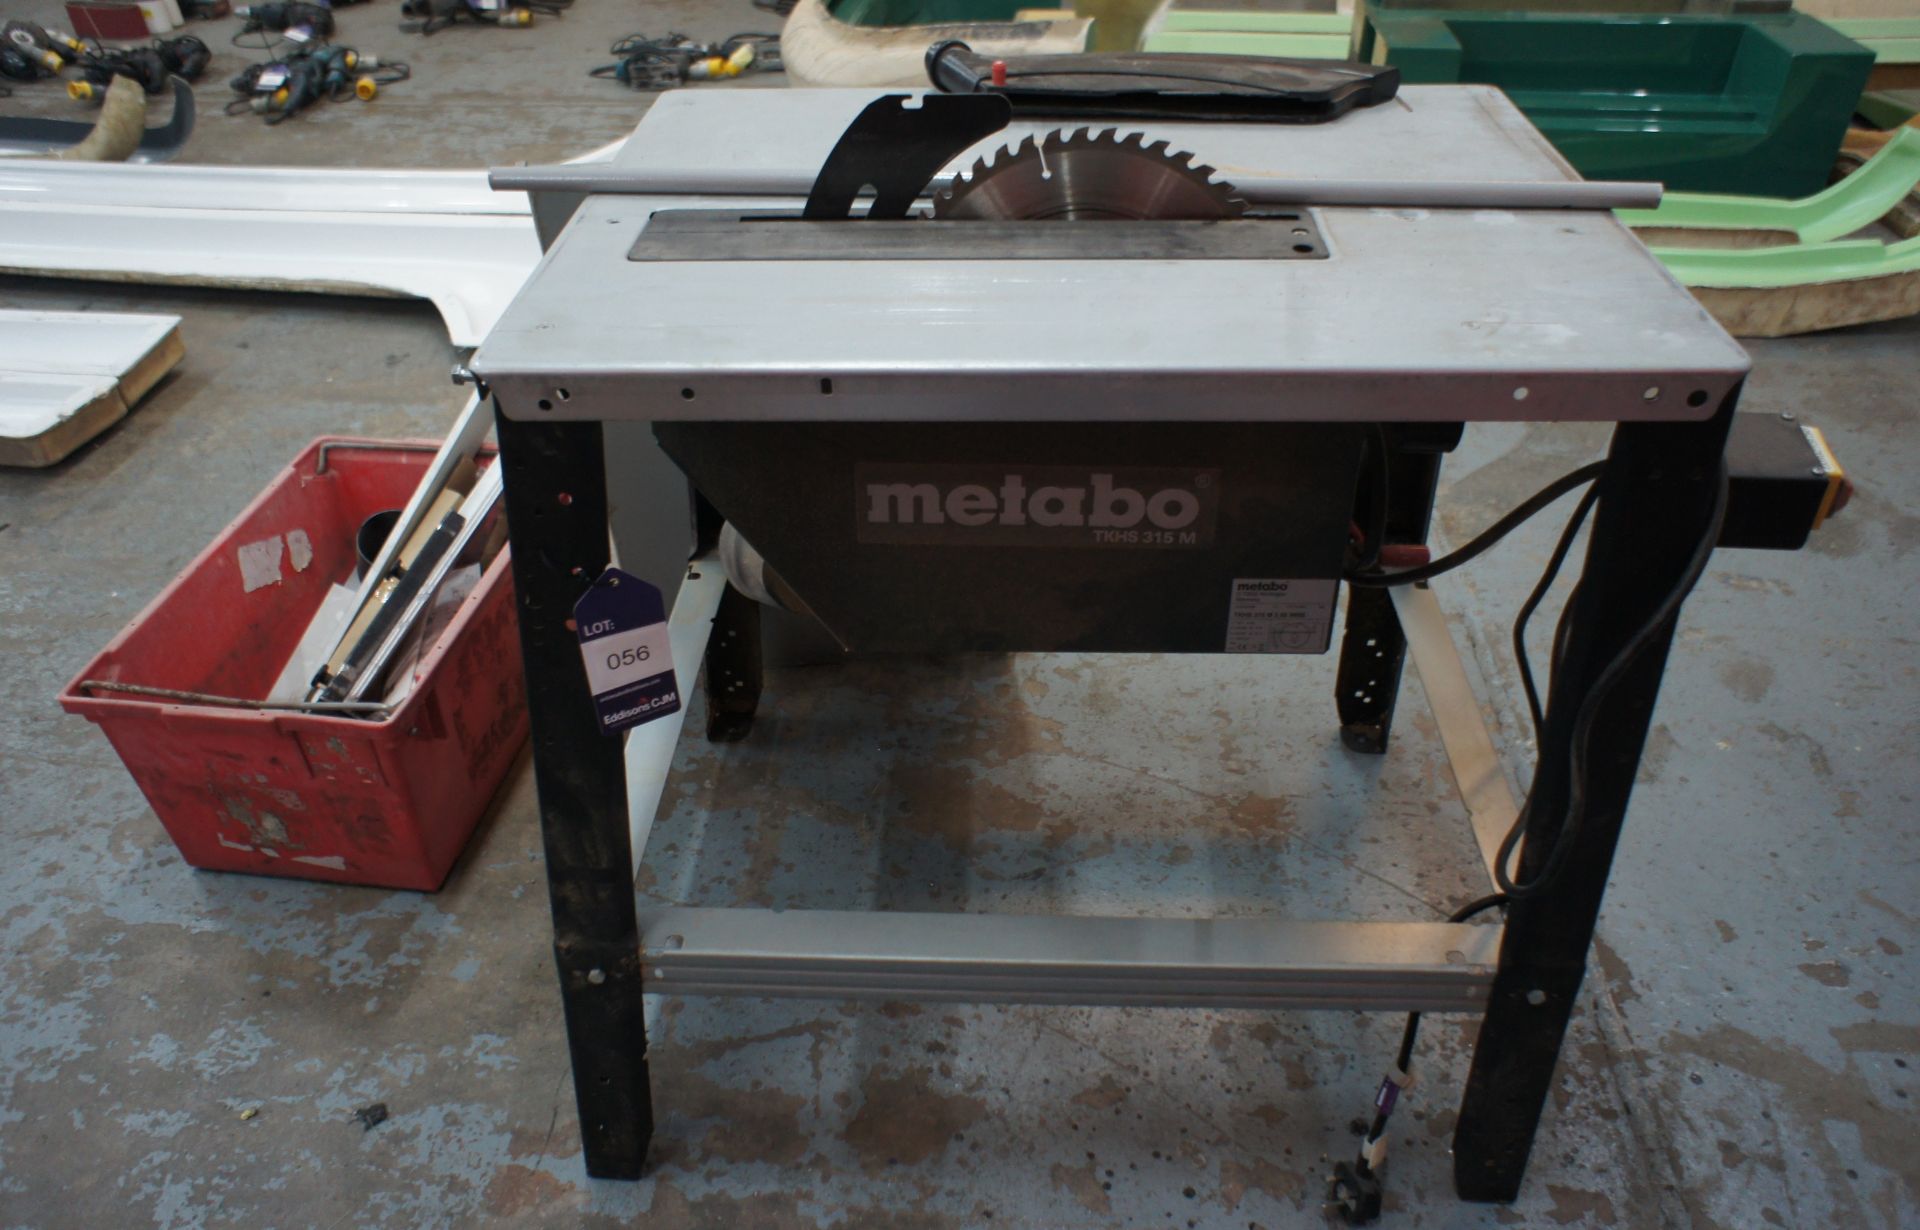 Metabo TKHS 315m table saw